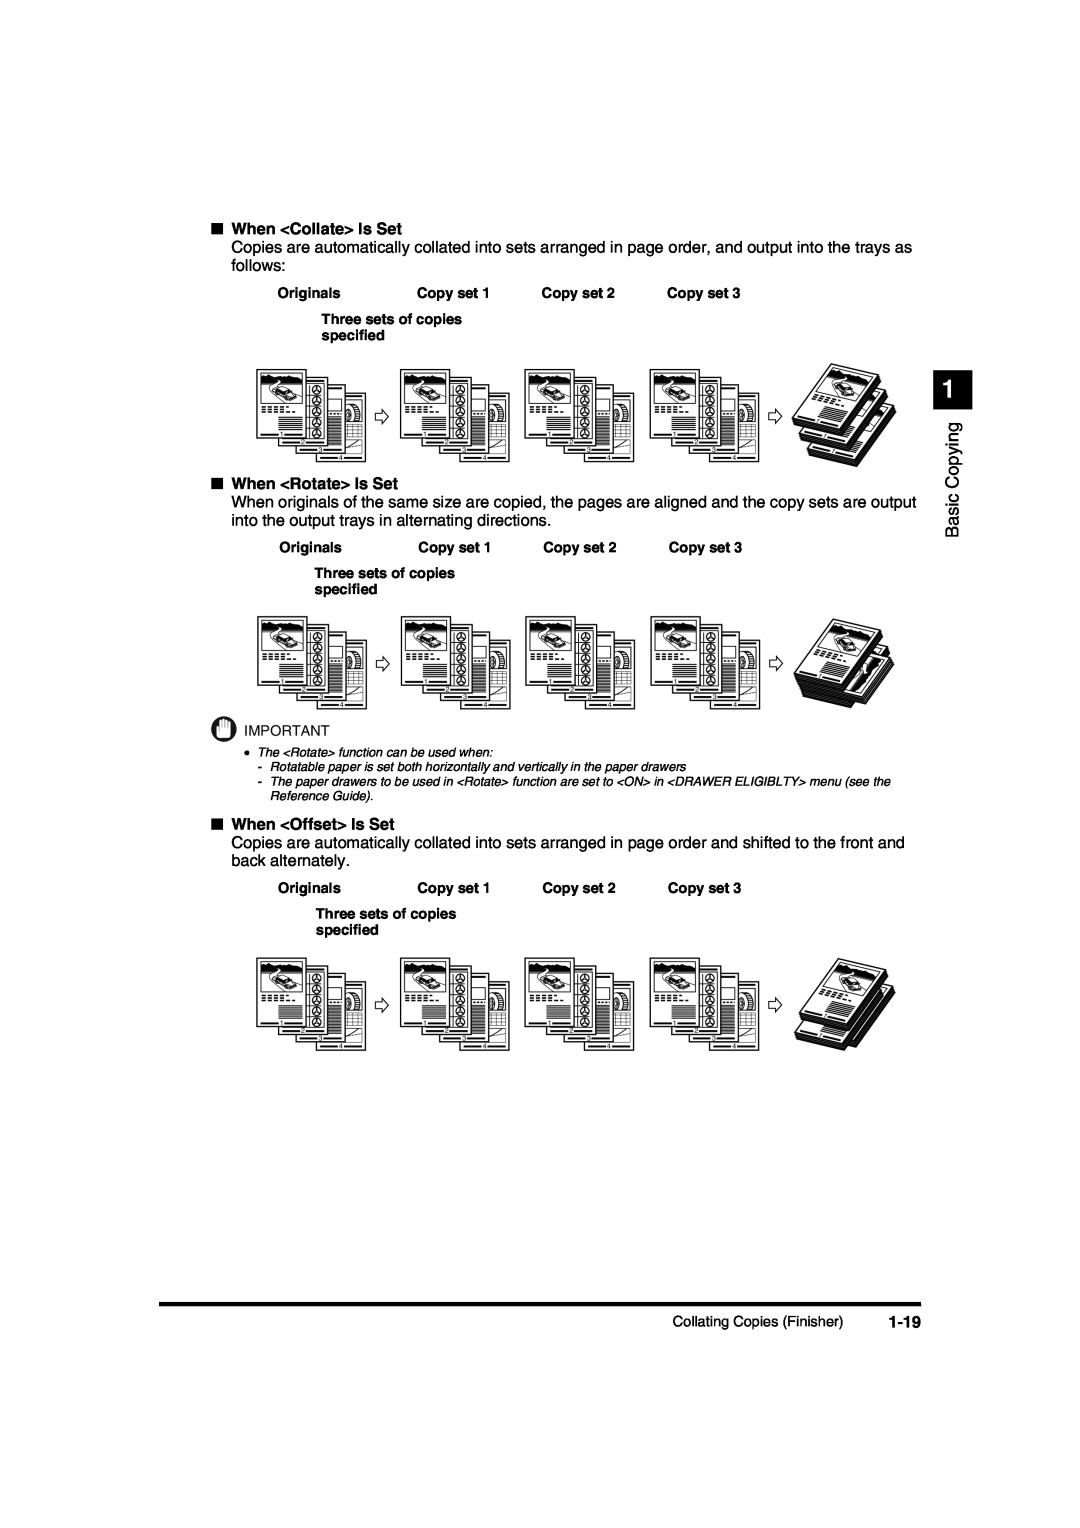 Canon IR1600 manual When Collate Is Set, When Rotate Is Set, When Offset Is Set, 1-19, Basic Copying 